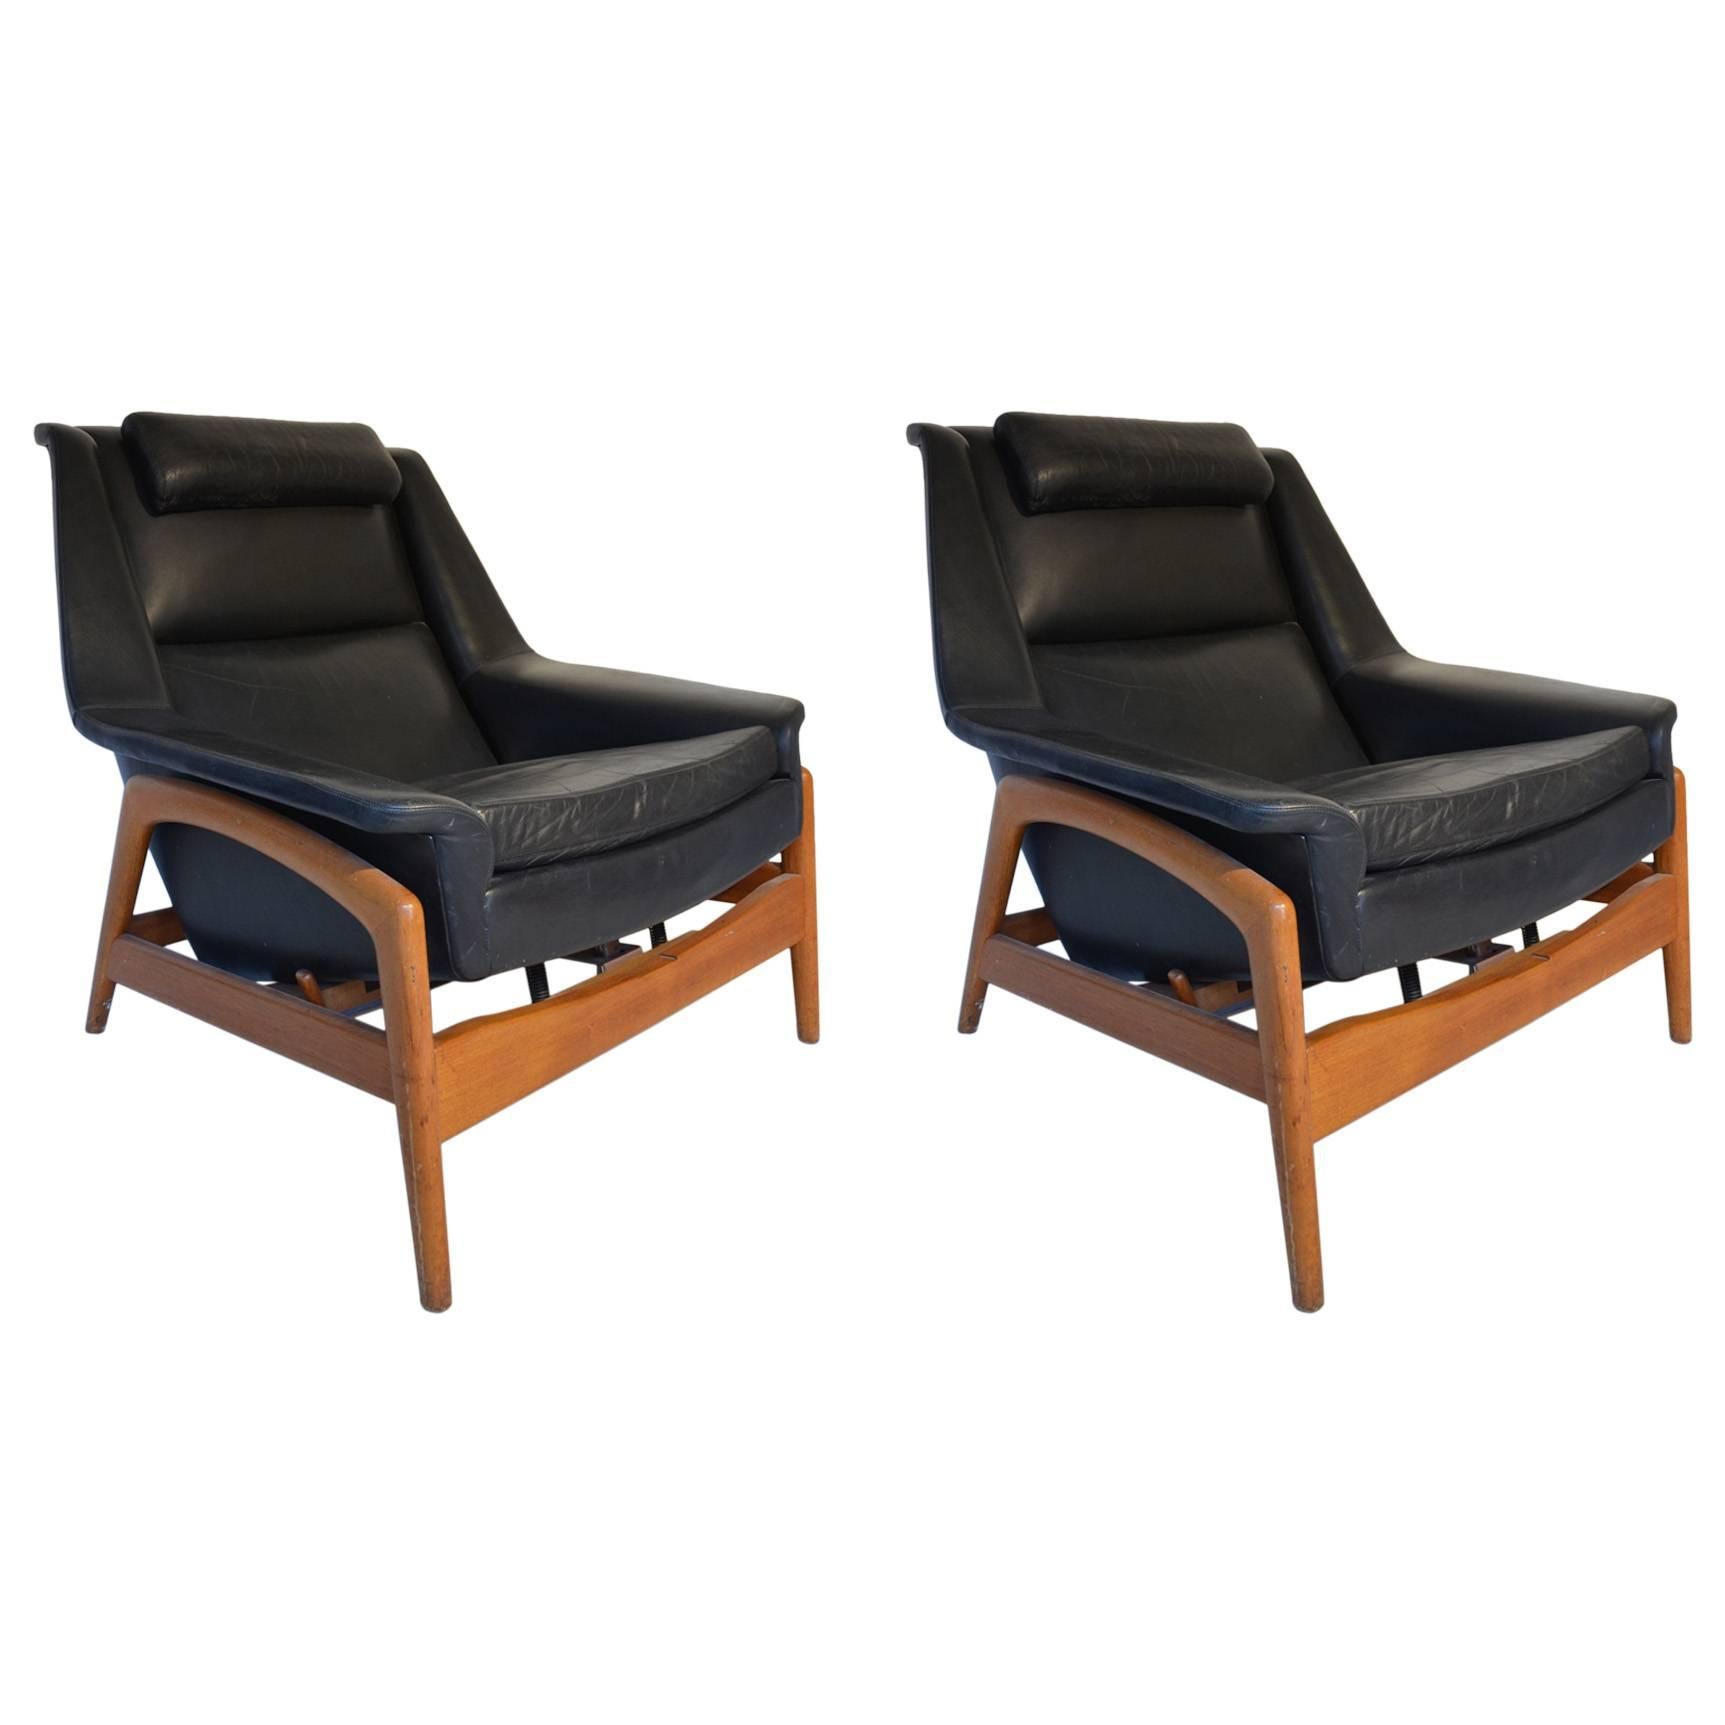 Fantastic Pair of Danish Wood and Leather Armchairs and One Ottoman, circa 1960